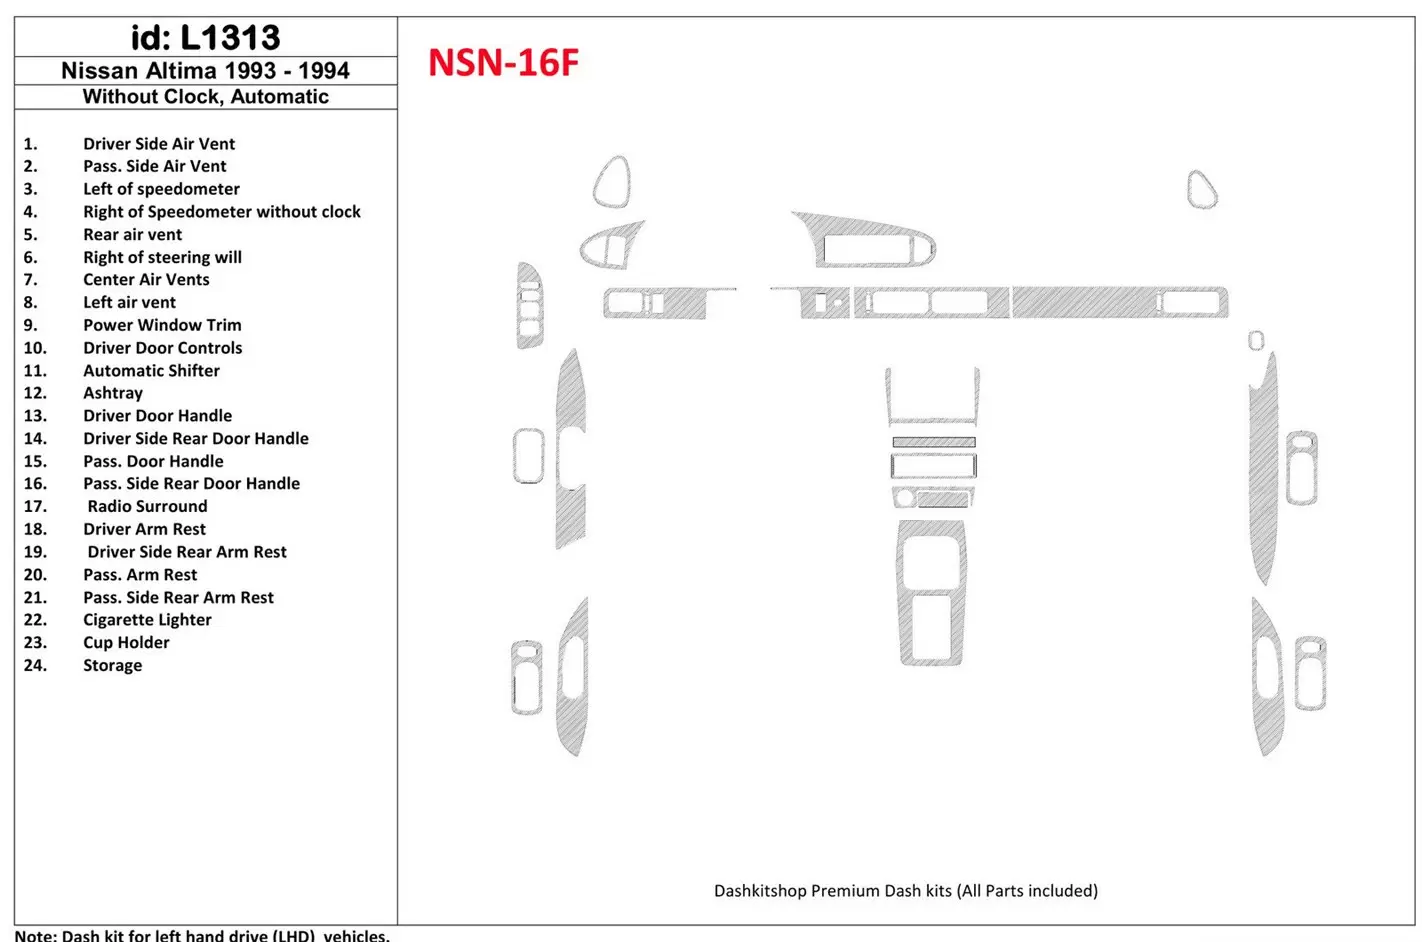 Nissan Altima 1993-1993 Automatic Gearbox, Without watches, Without OEM, 23 Parts set BD Interieur Dashboard Bekleding Volhouder